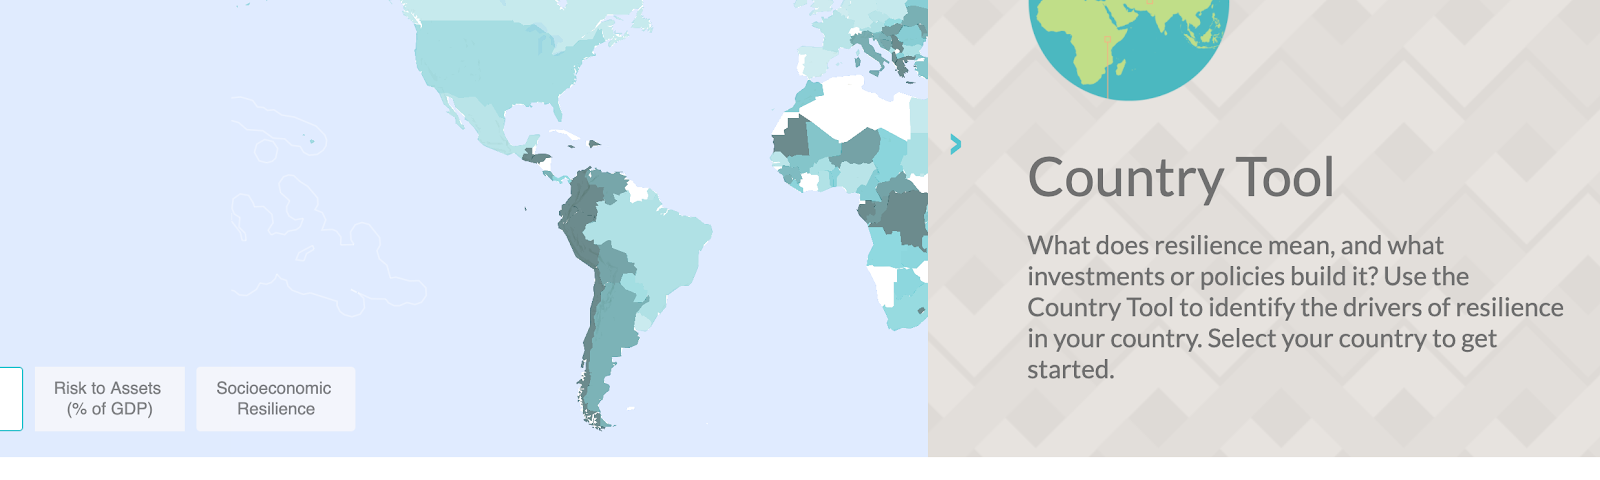 Landing page image of the World Bank country tool showing losses to assets, socioeconomic resilience and well being.